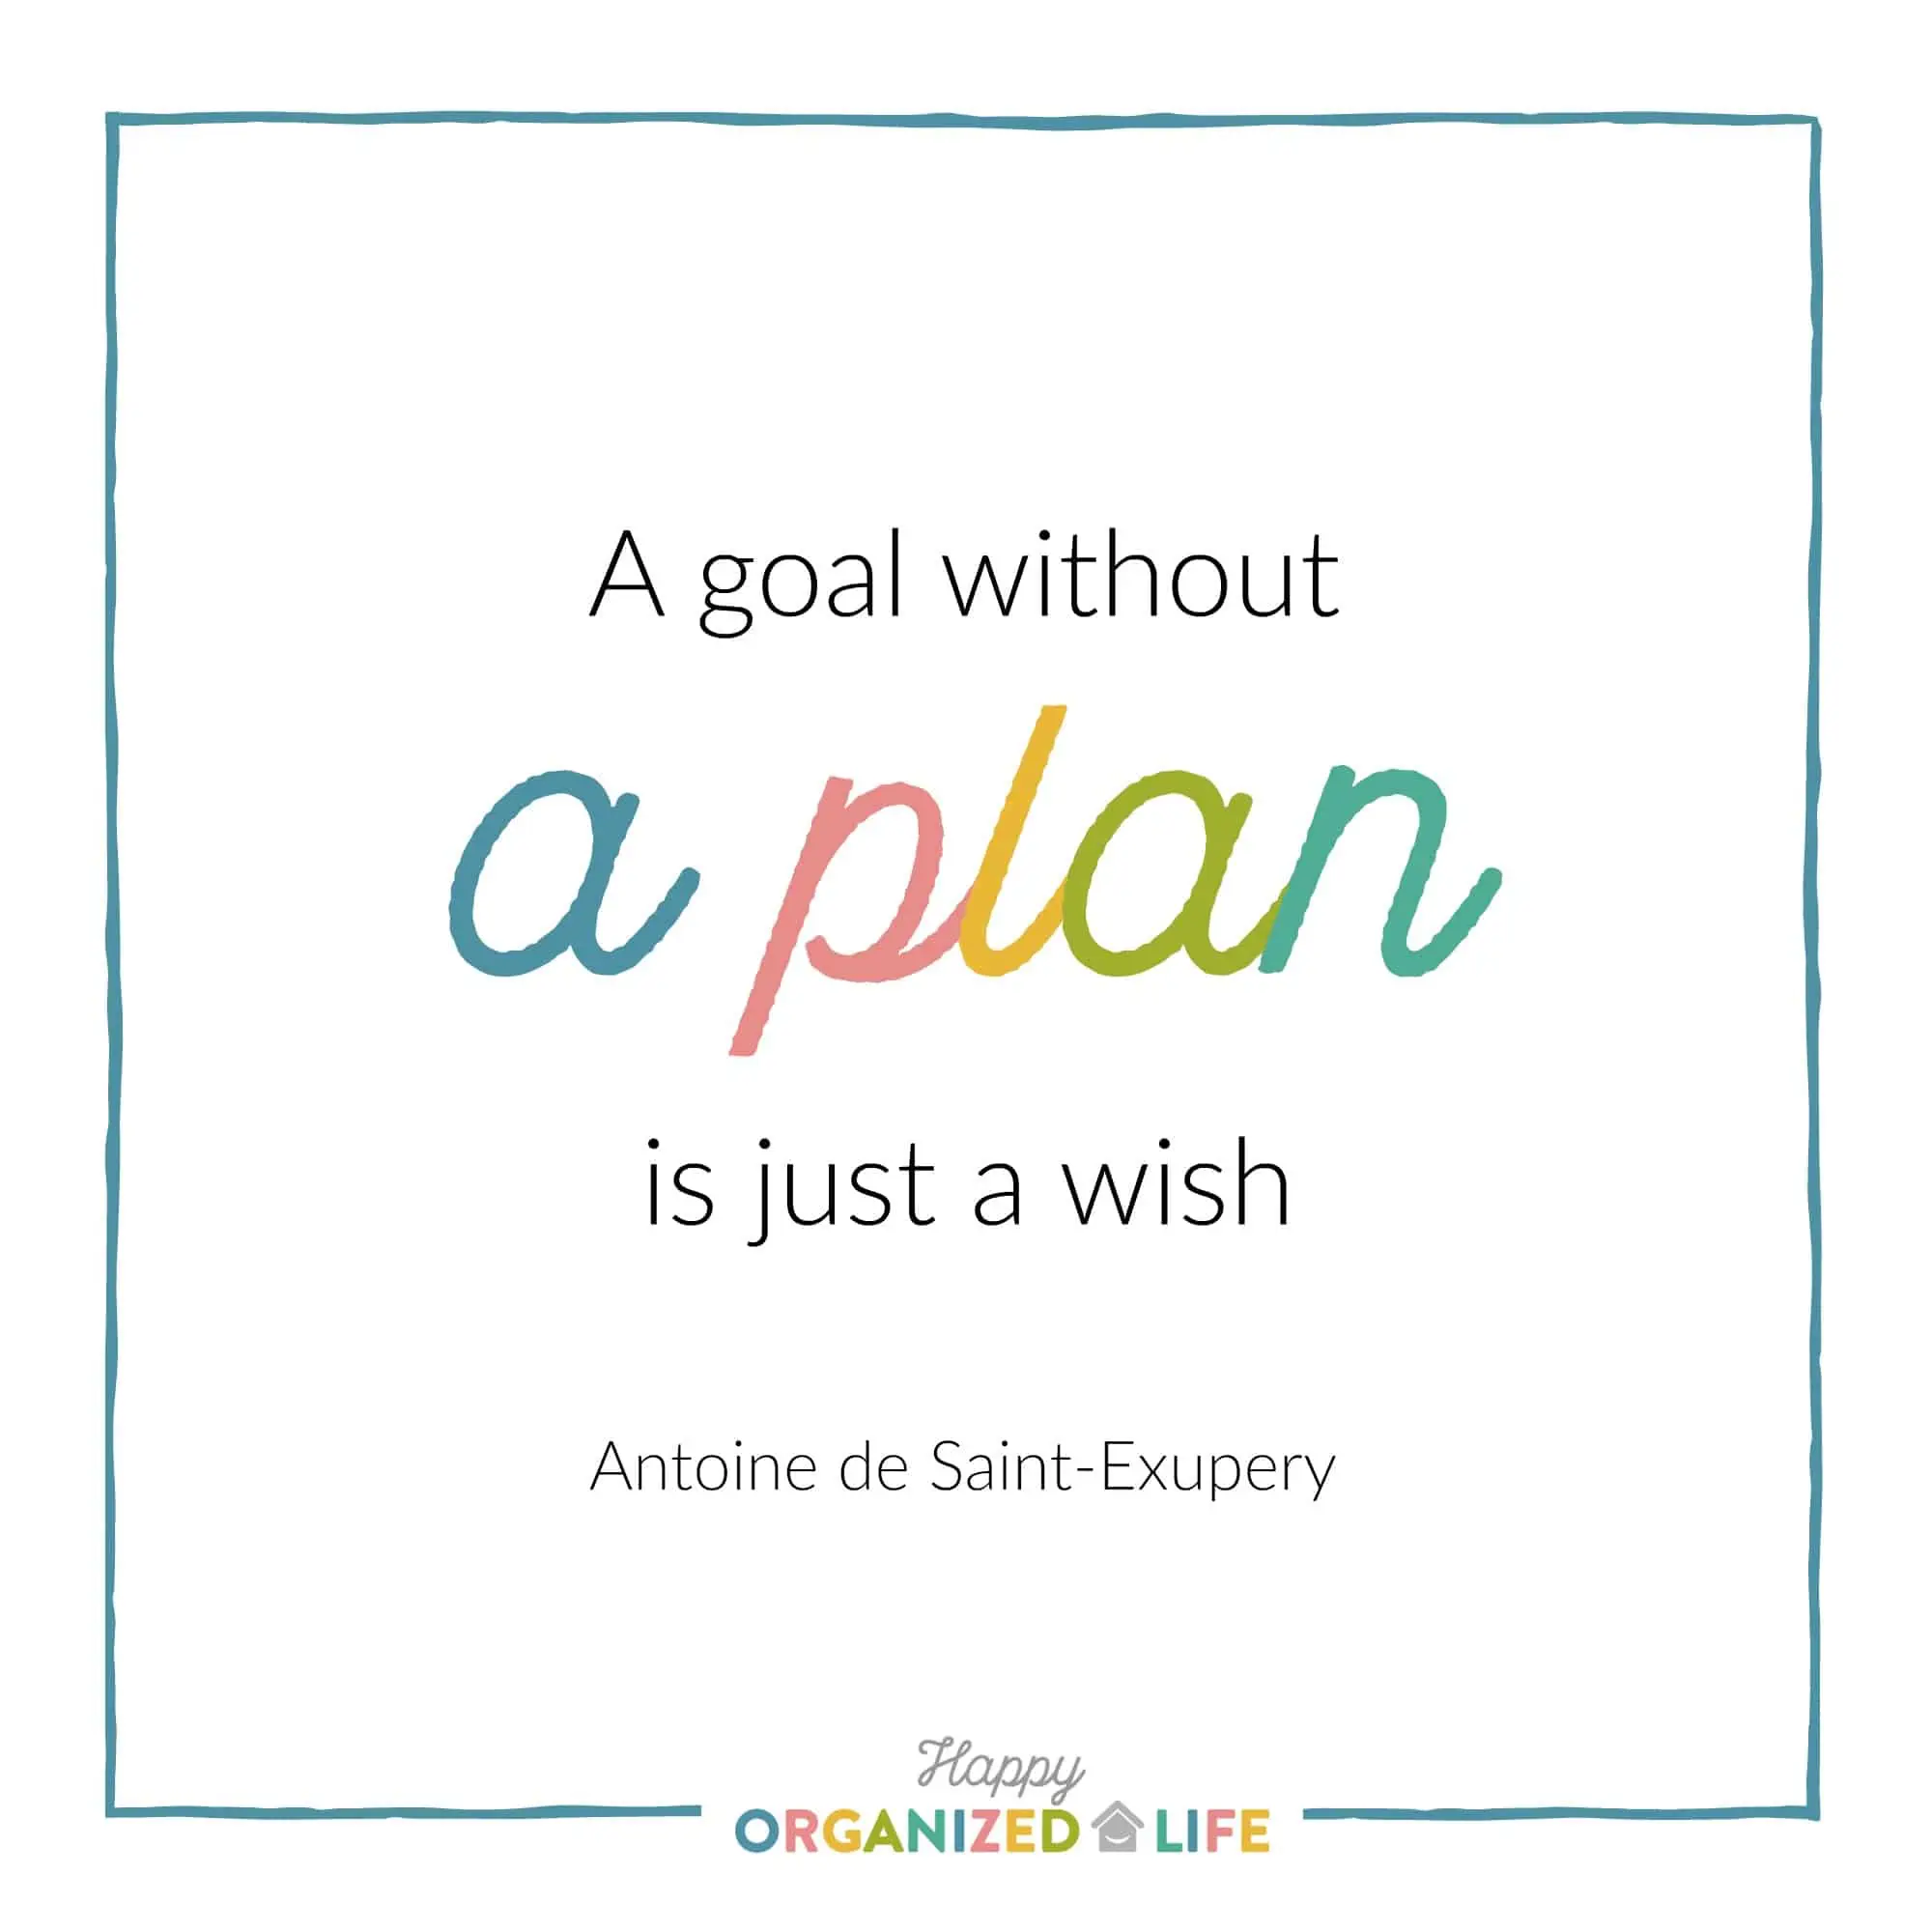 "A goal without a plan is just a wish." Make 2018 your BEST YEAR EVER!! Setting goals and being intentional with your time can make all the difference between having a blah year and a great one! Enter to win this 2018 planning and goal setting bundle, and have your best year ever! One lucky winner will win: a printable 2018 planner, printable goals workbook, and membership to the exclusive goal setting masterclass and goal achieving community so you'll get the guidance, support, and inspiration you need to make 2018 on for the books! #planner #printablecalendar #goals #2018 #calendar #printables #organization